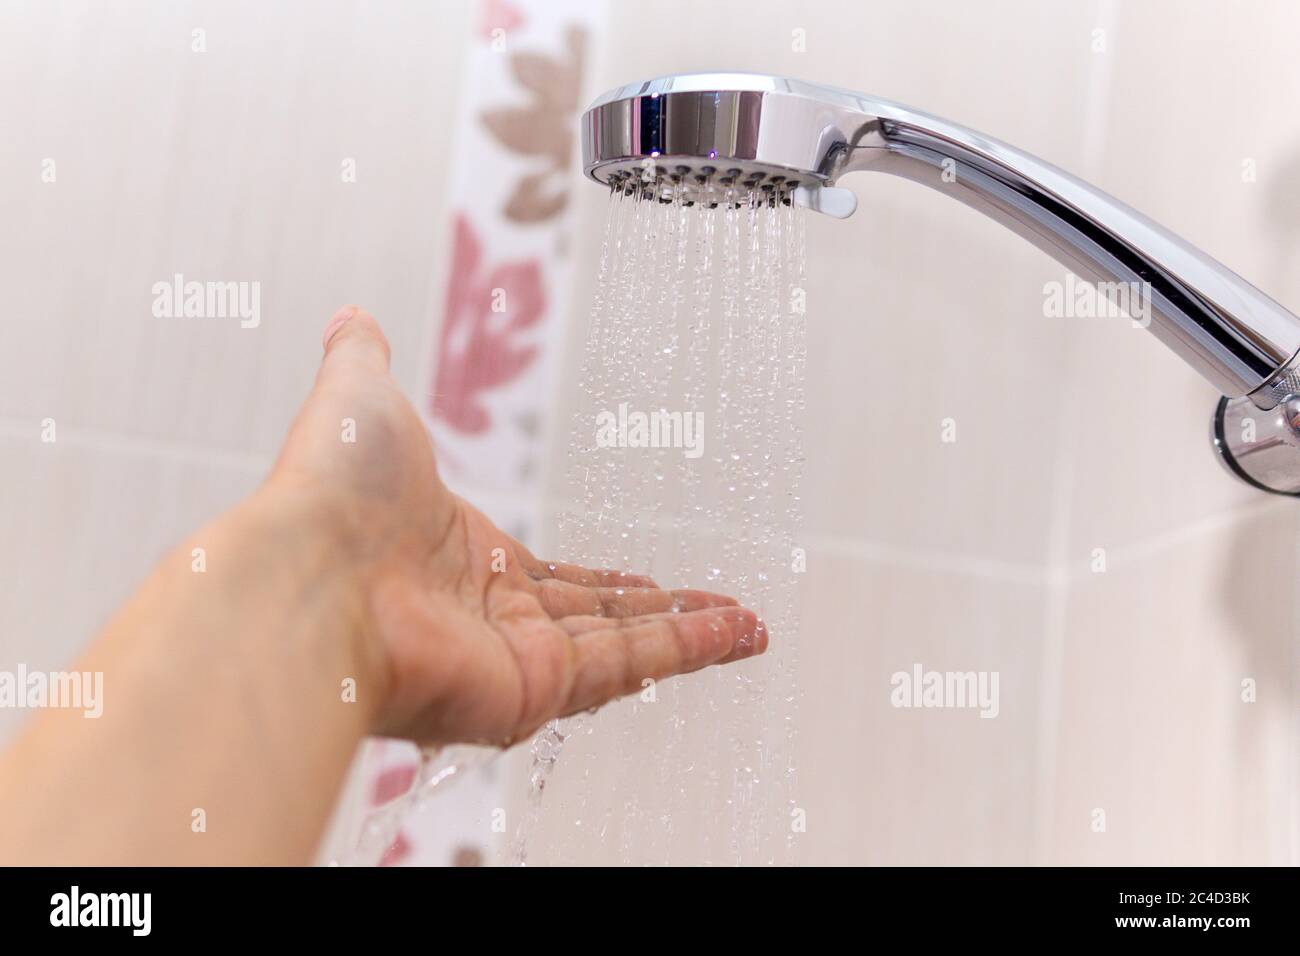 https://c8.alamy.com/comp/2C4D3BK/hands-check-the-temperature-of-the-shower-water-a-mans-hand-under-a-stream-of-water-selective-focus-2C4D3BK.jpg